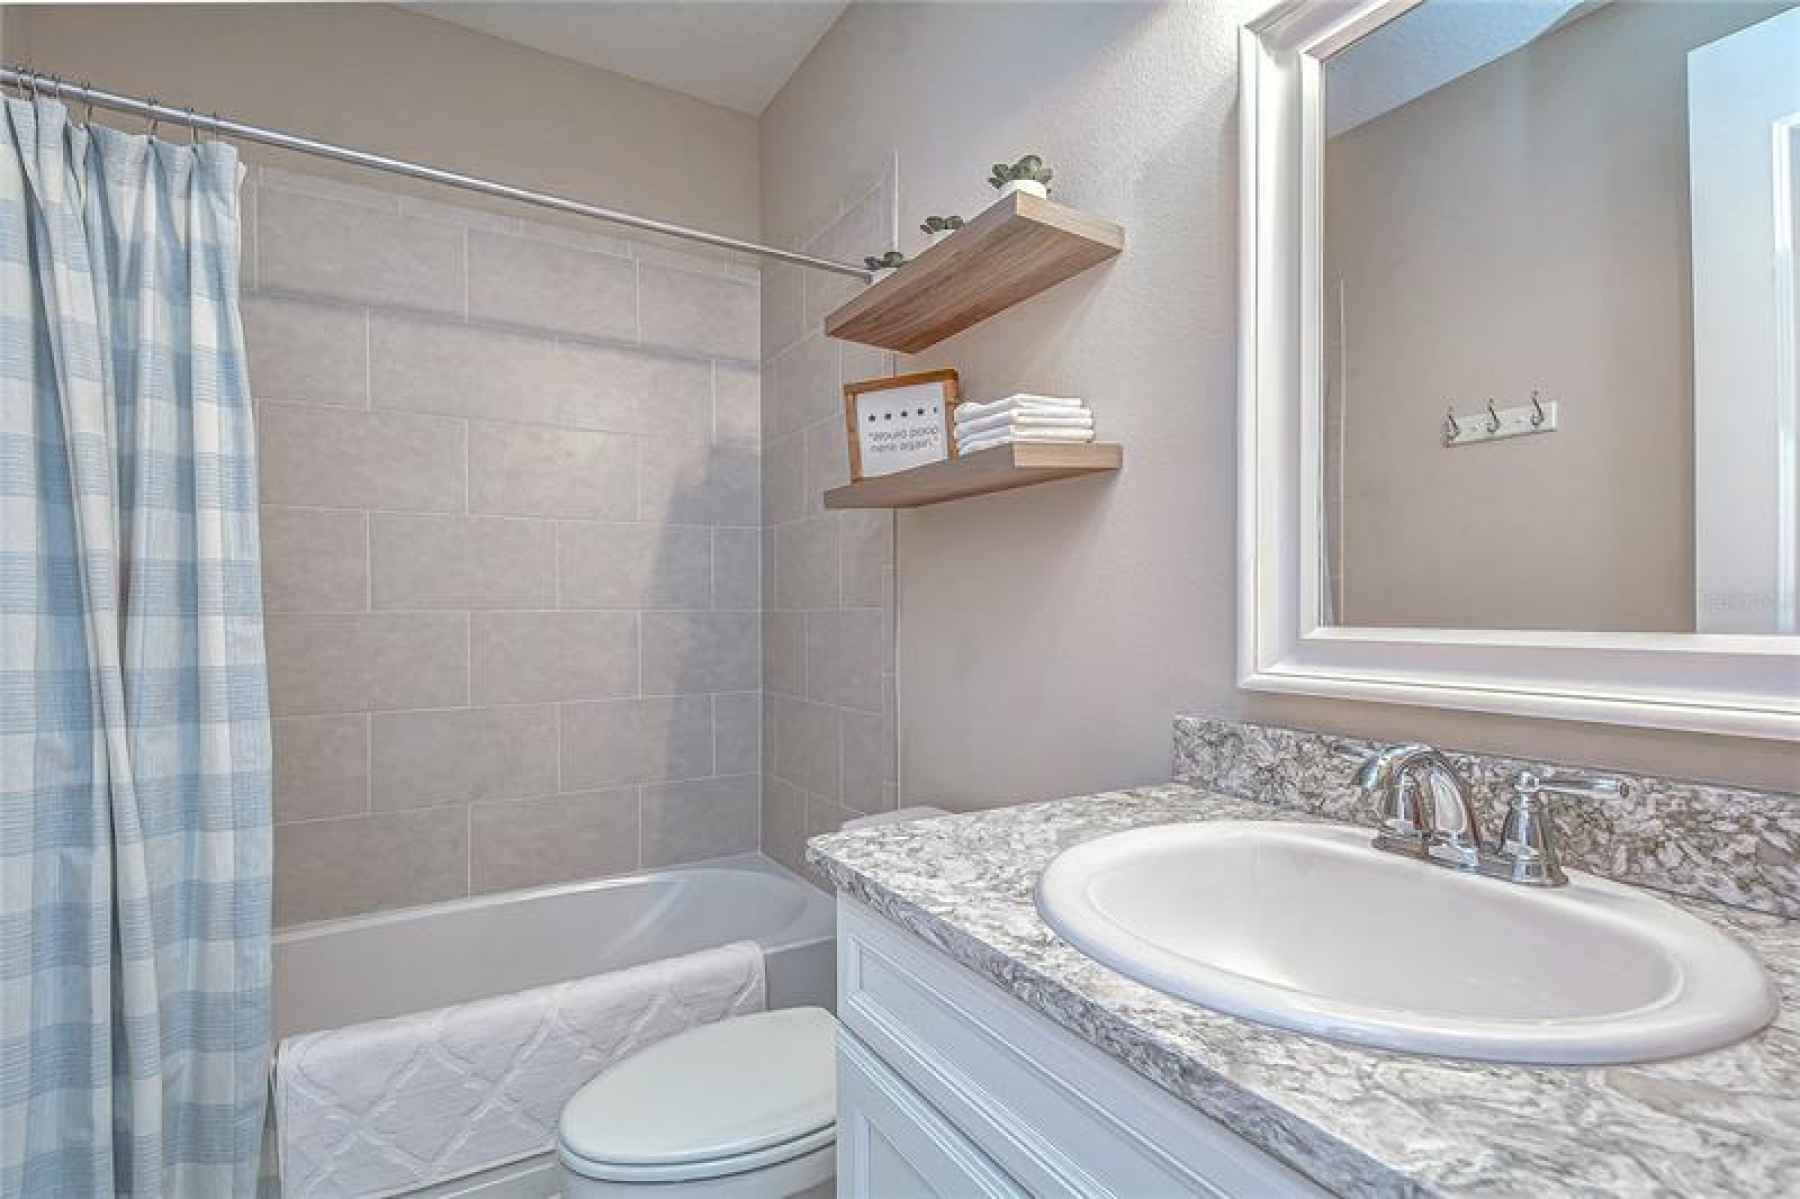 Check out the vanity lighting in this bathroom!